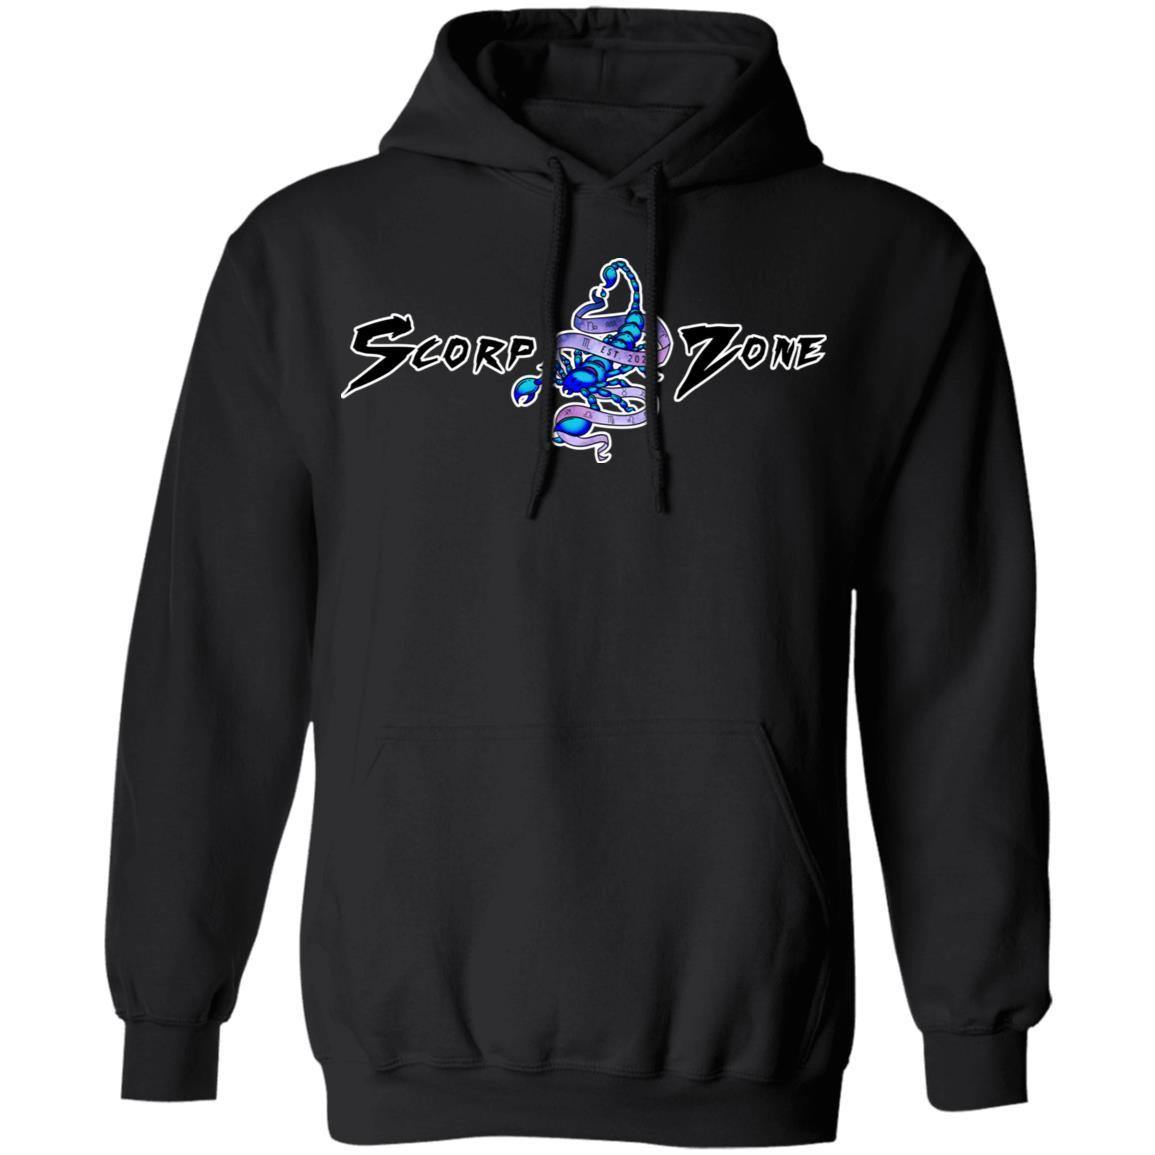 VIRGO DESIGN ON BACK AND SMALL SCORP ZONE LOGO ON FRONT - Z66 Pullover Hoodie - ScorpZone